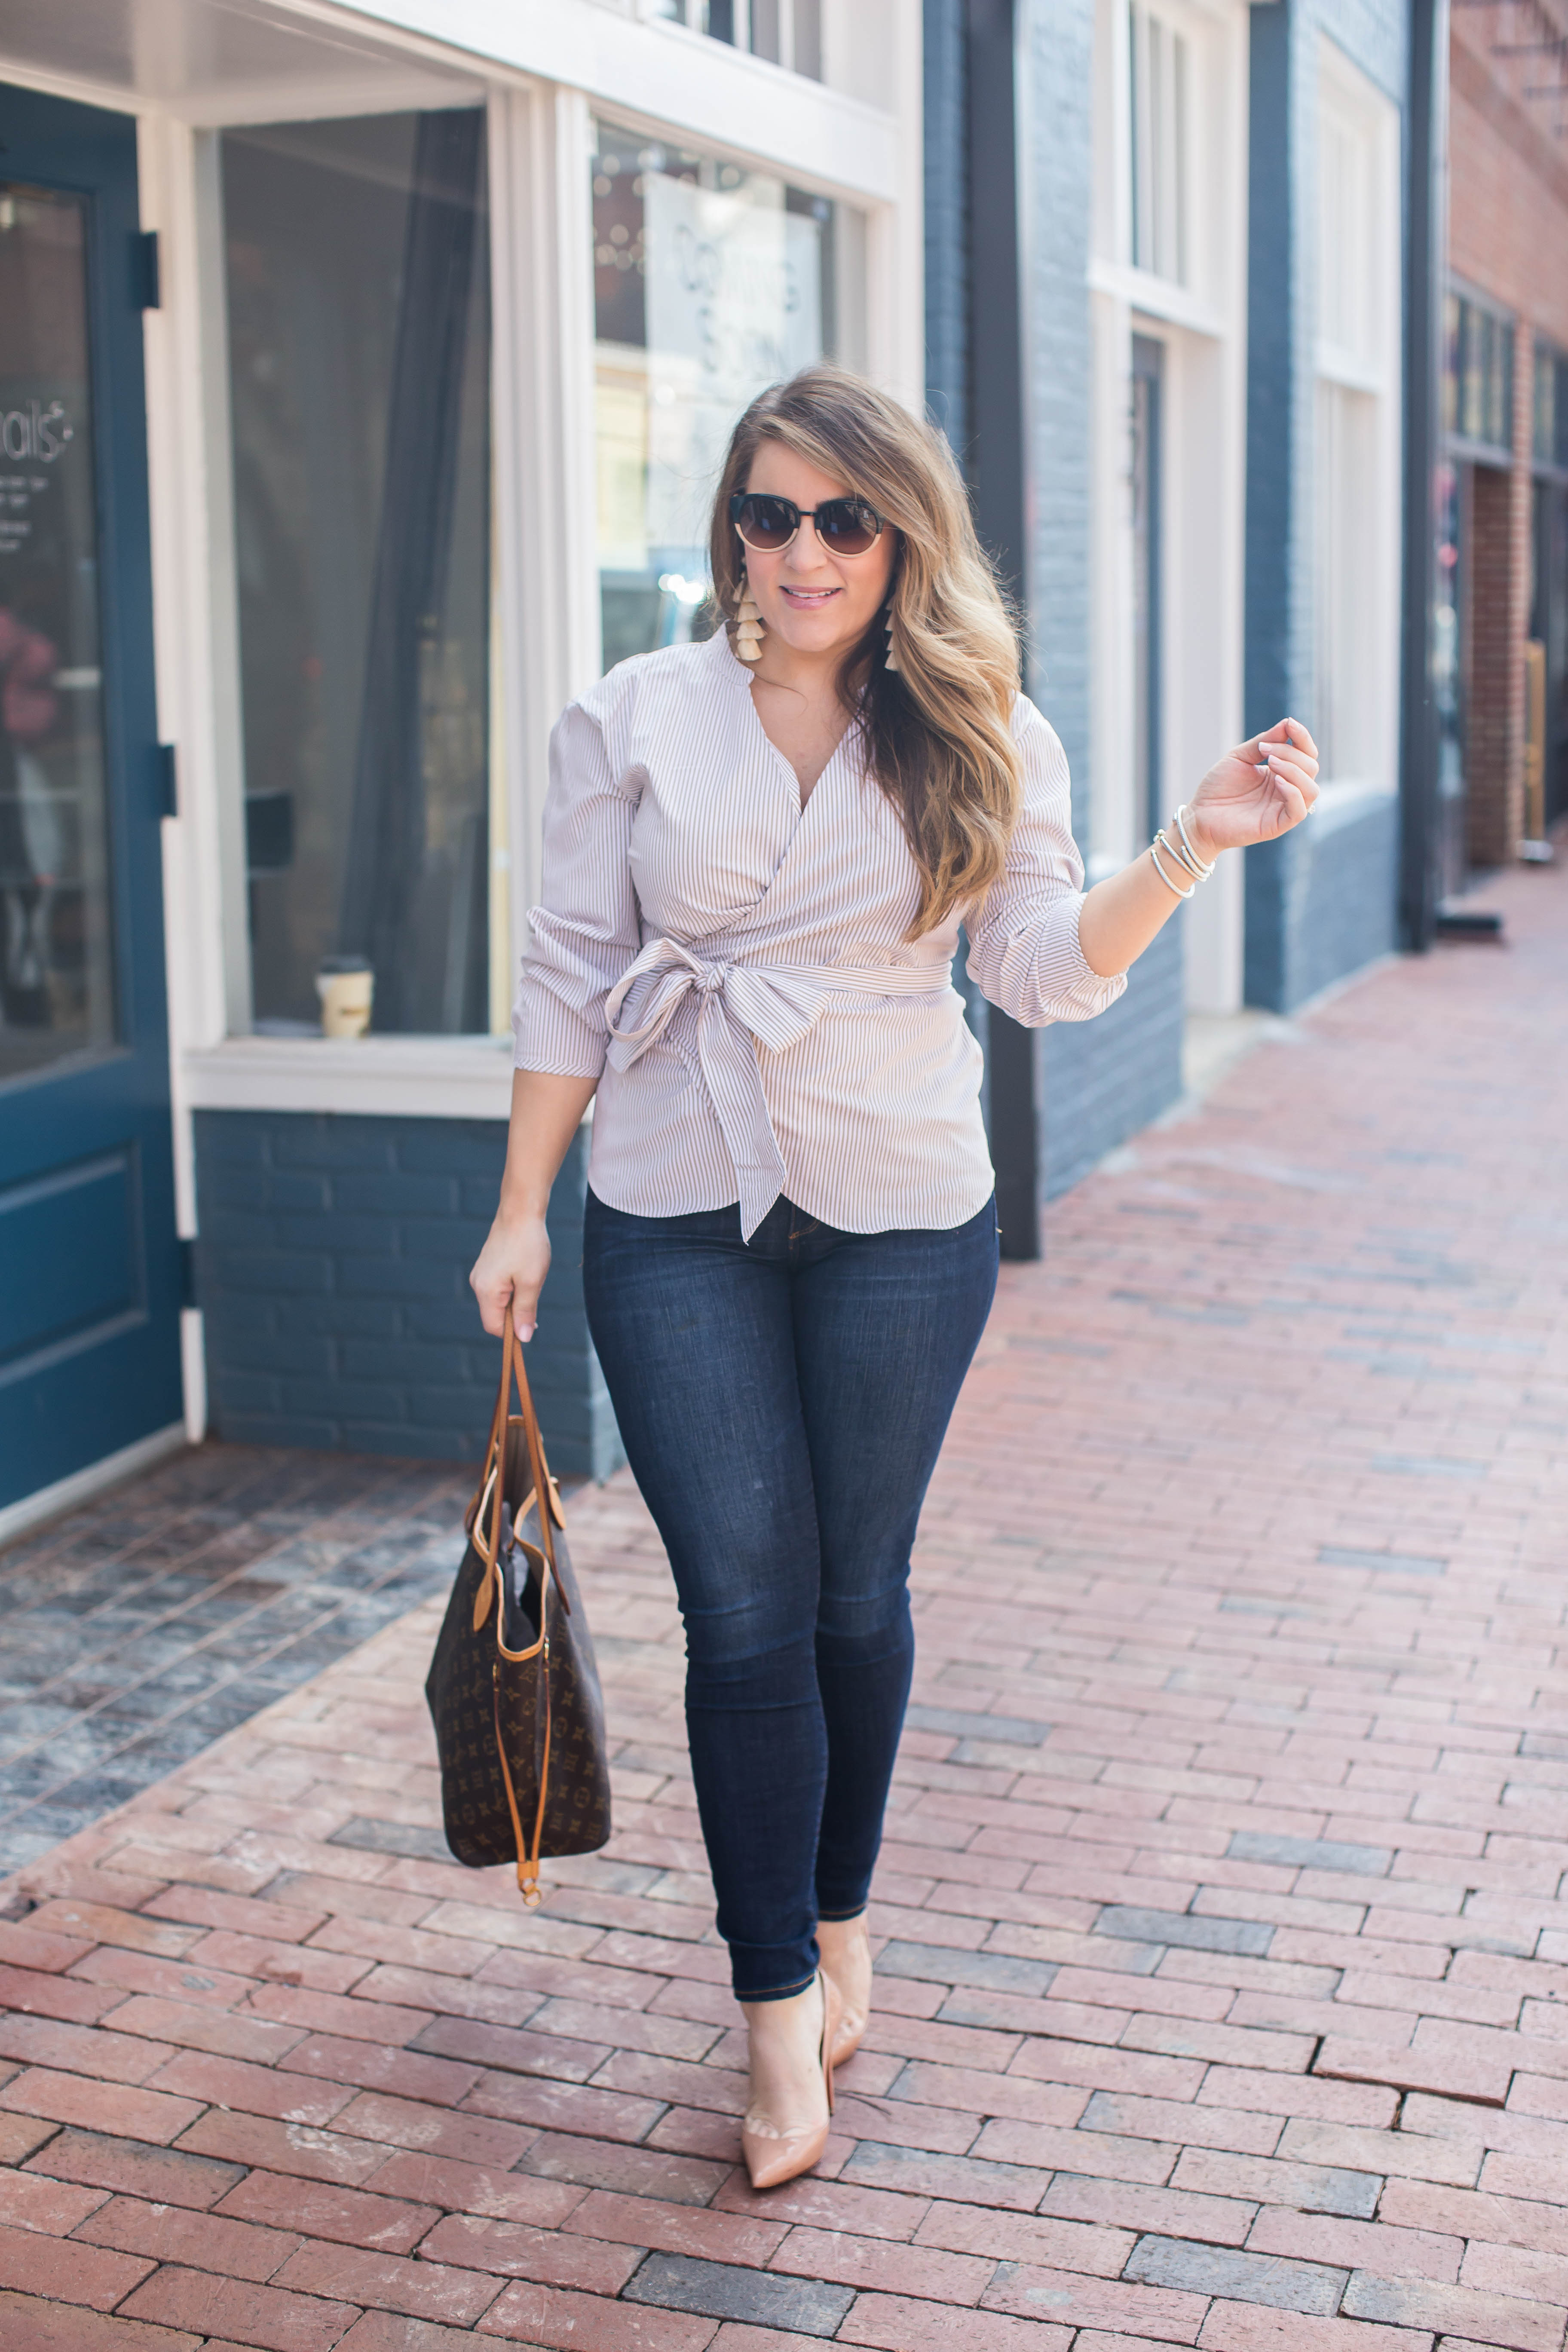 Spring Wrap Top by popular North Carolina fashion blogger Coffee Beans and Bobby Pins